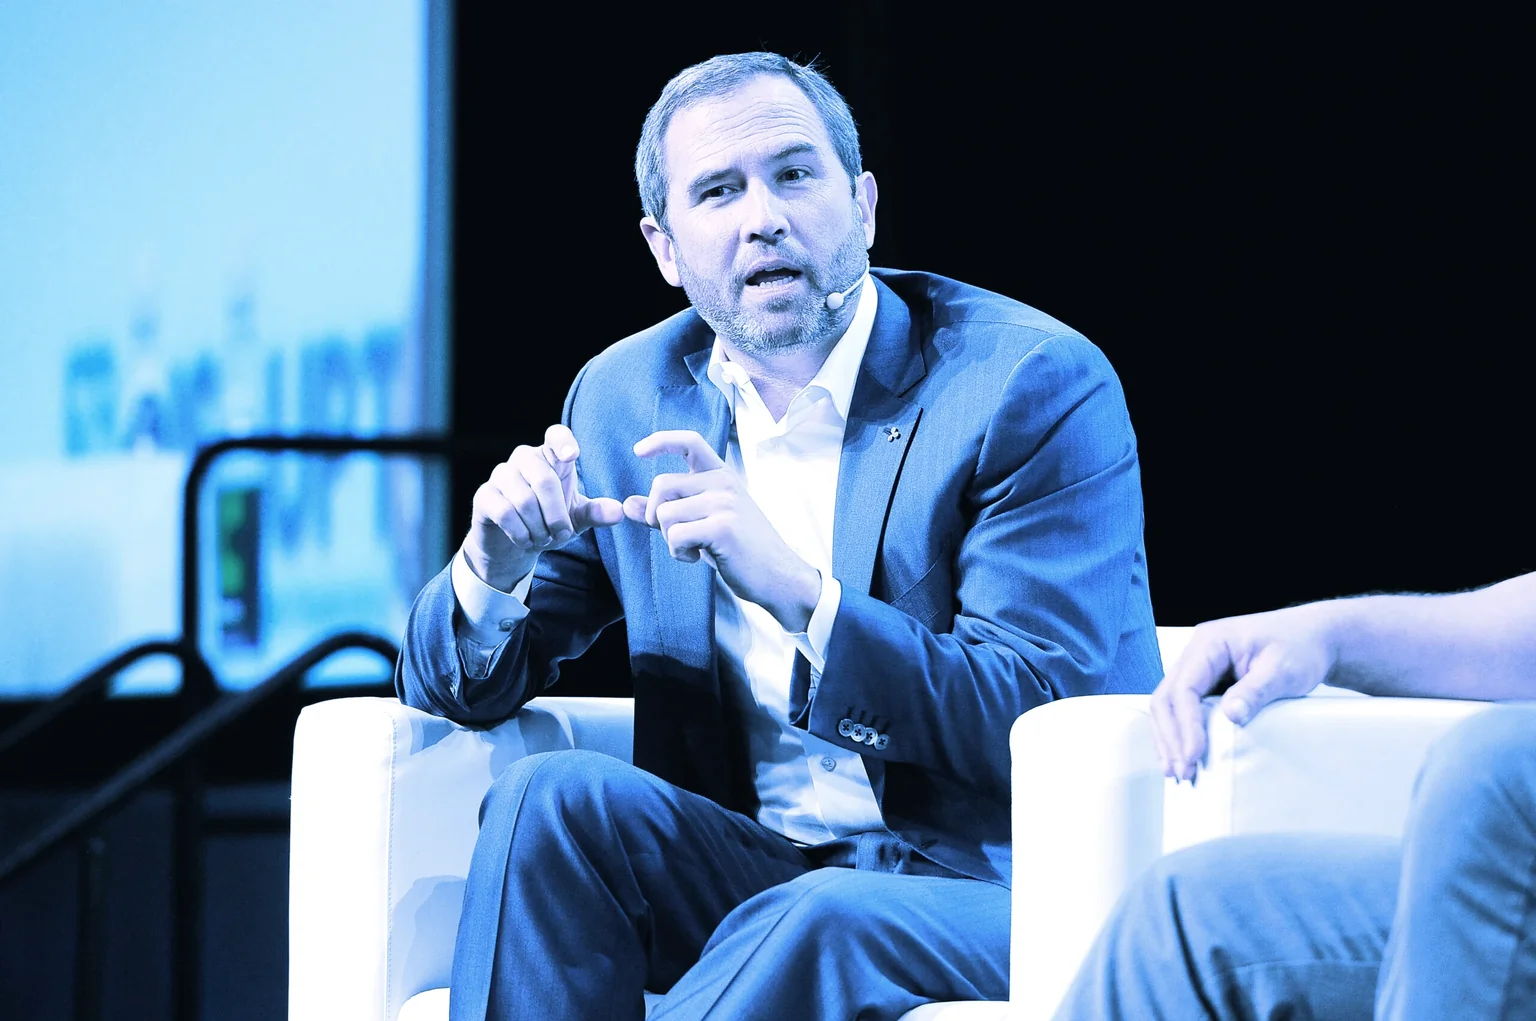 Ripple CEO Brad Garlinghouse speaks at TechCrunch Disrupt SF on September 5, 2018 in San Francisco. Image: Steve Jennings/Getty Images for TechCrunch (CC BY 2.0)